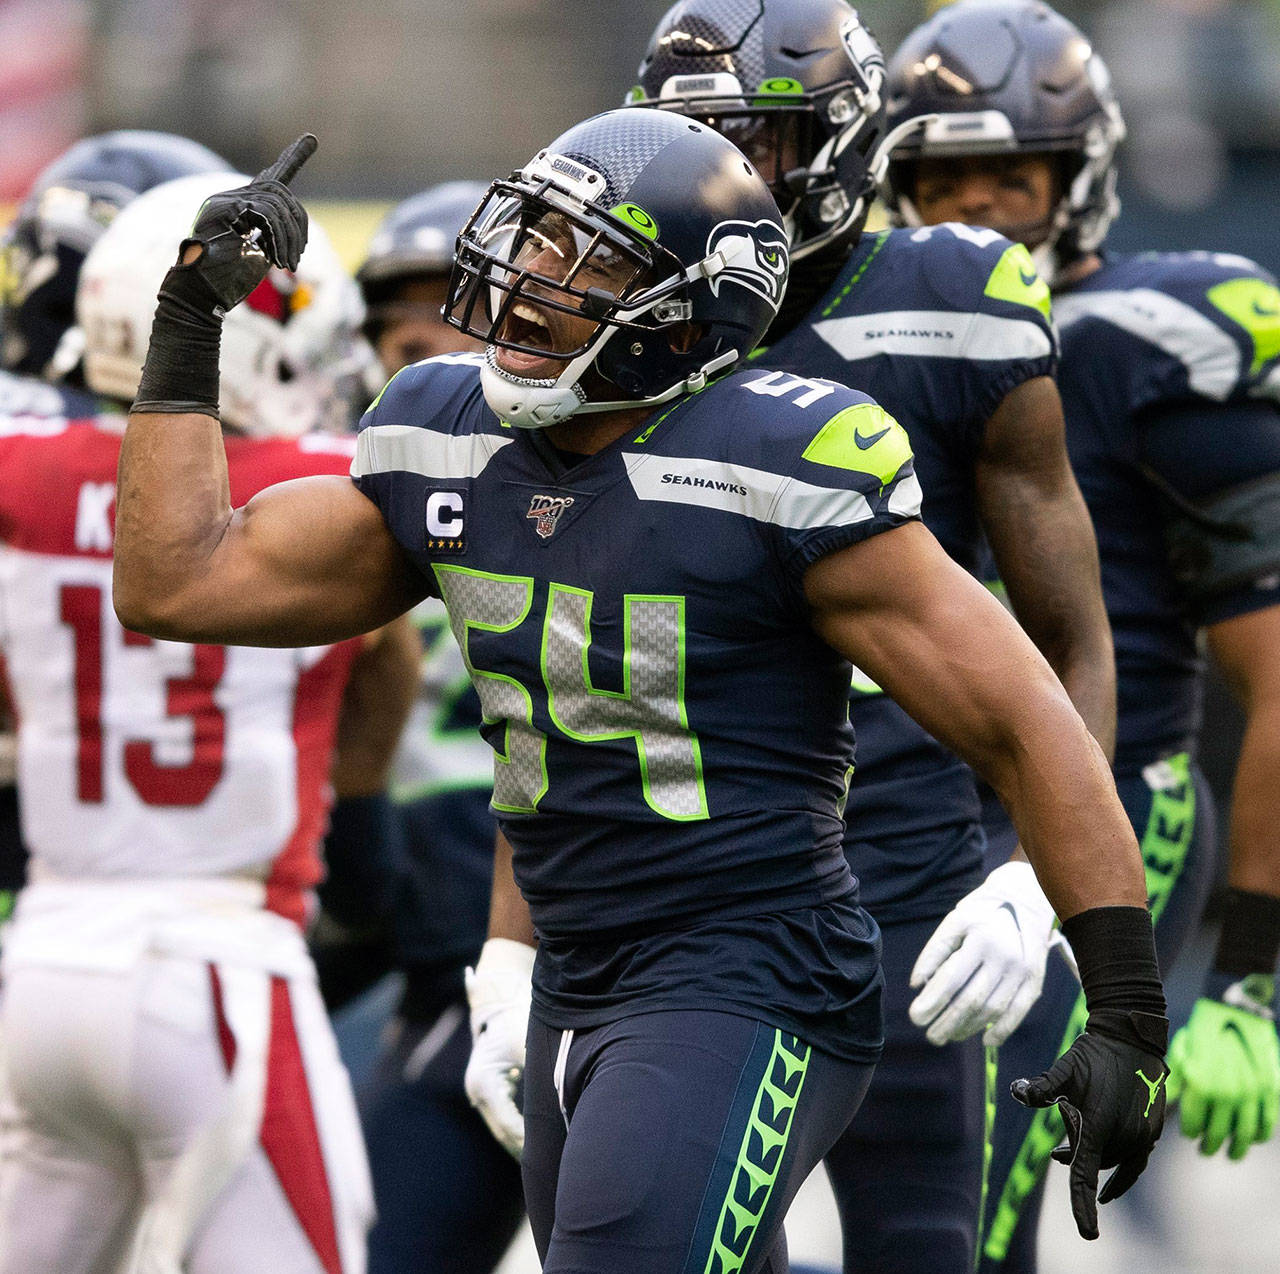 Seattle Seahawks middle linebacker Bobby Wagner (54) celebrates after tackling Arizona Cardinals wide receiver Pharoh Cooper (12) in the first half on Sunday, Dec. 22, 2019 at CenturyLink Field, in Seattle, Wash. (Amanda Snyder/Seattle Times/TNS)